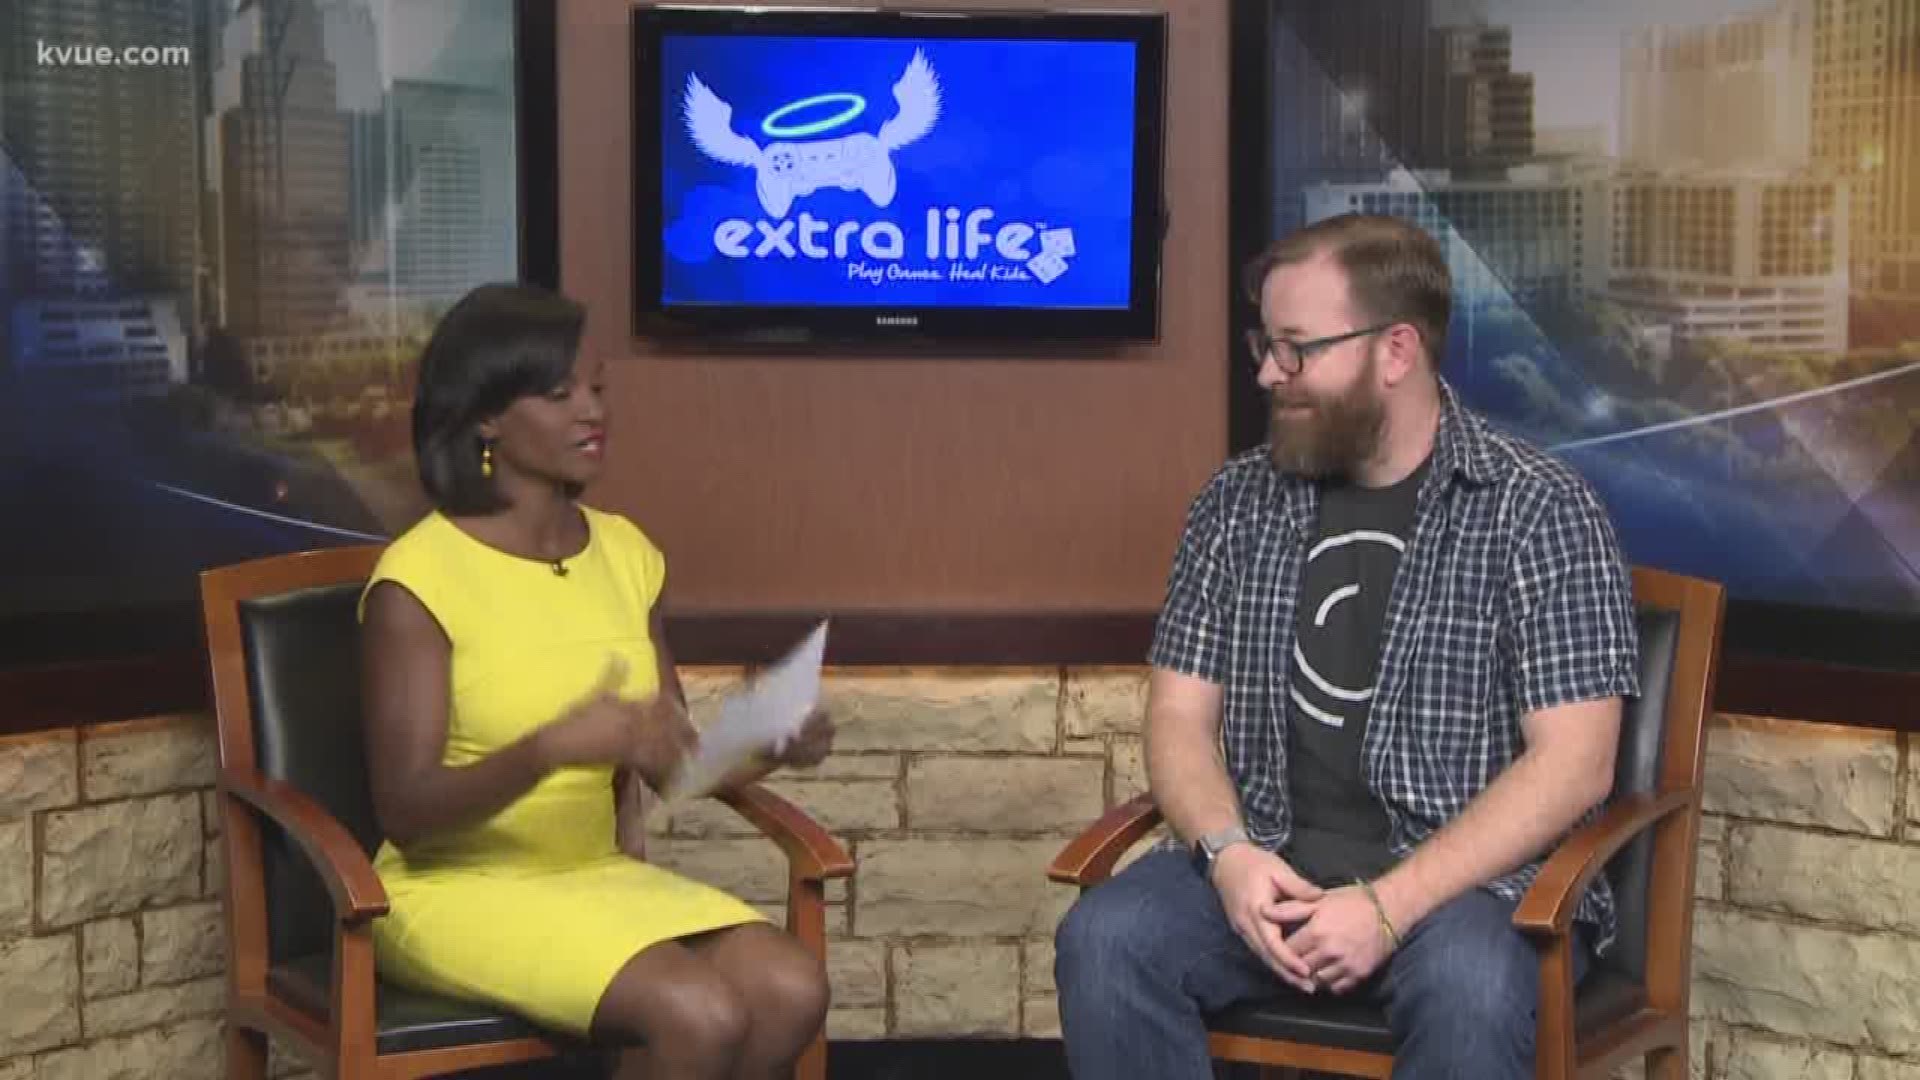 Jack Pattillo from Rooster Teeth discusses the company's role in the annual Extra Life fundraiser, which supports Children's Miracle Network hospitals.